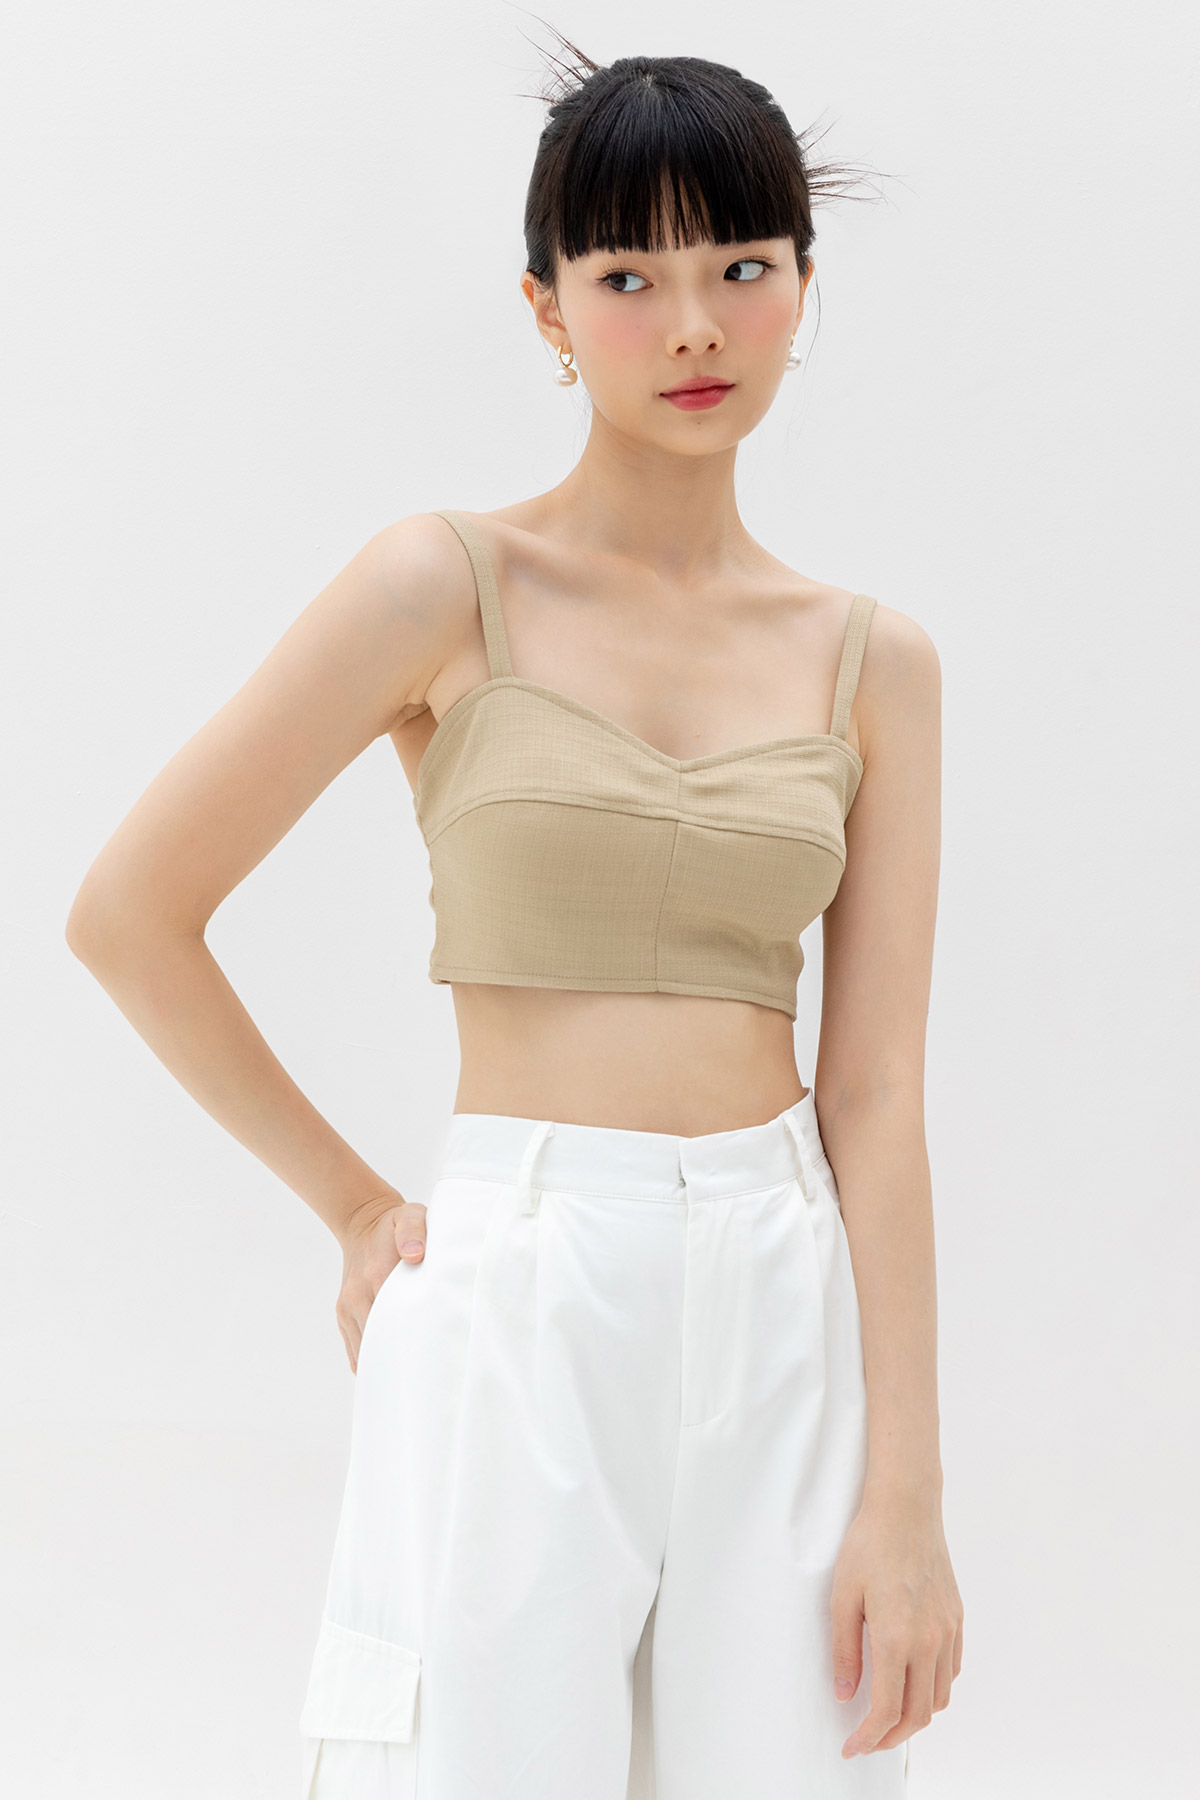 *SALE* LUNA PADDED TOP - GINGER ALE [BY MODPARADE]